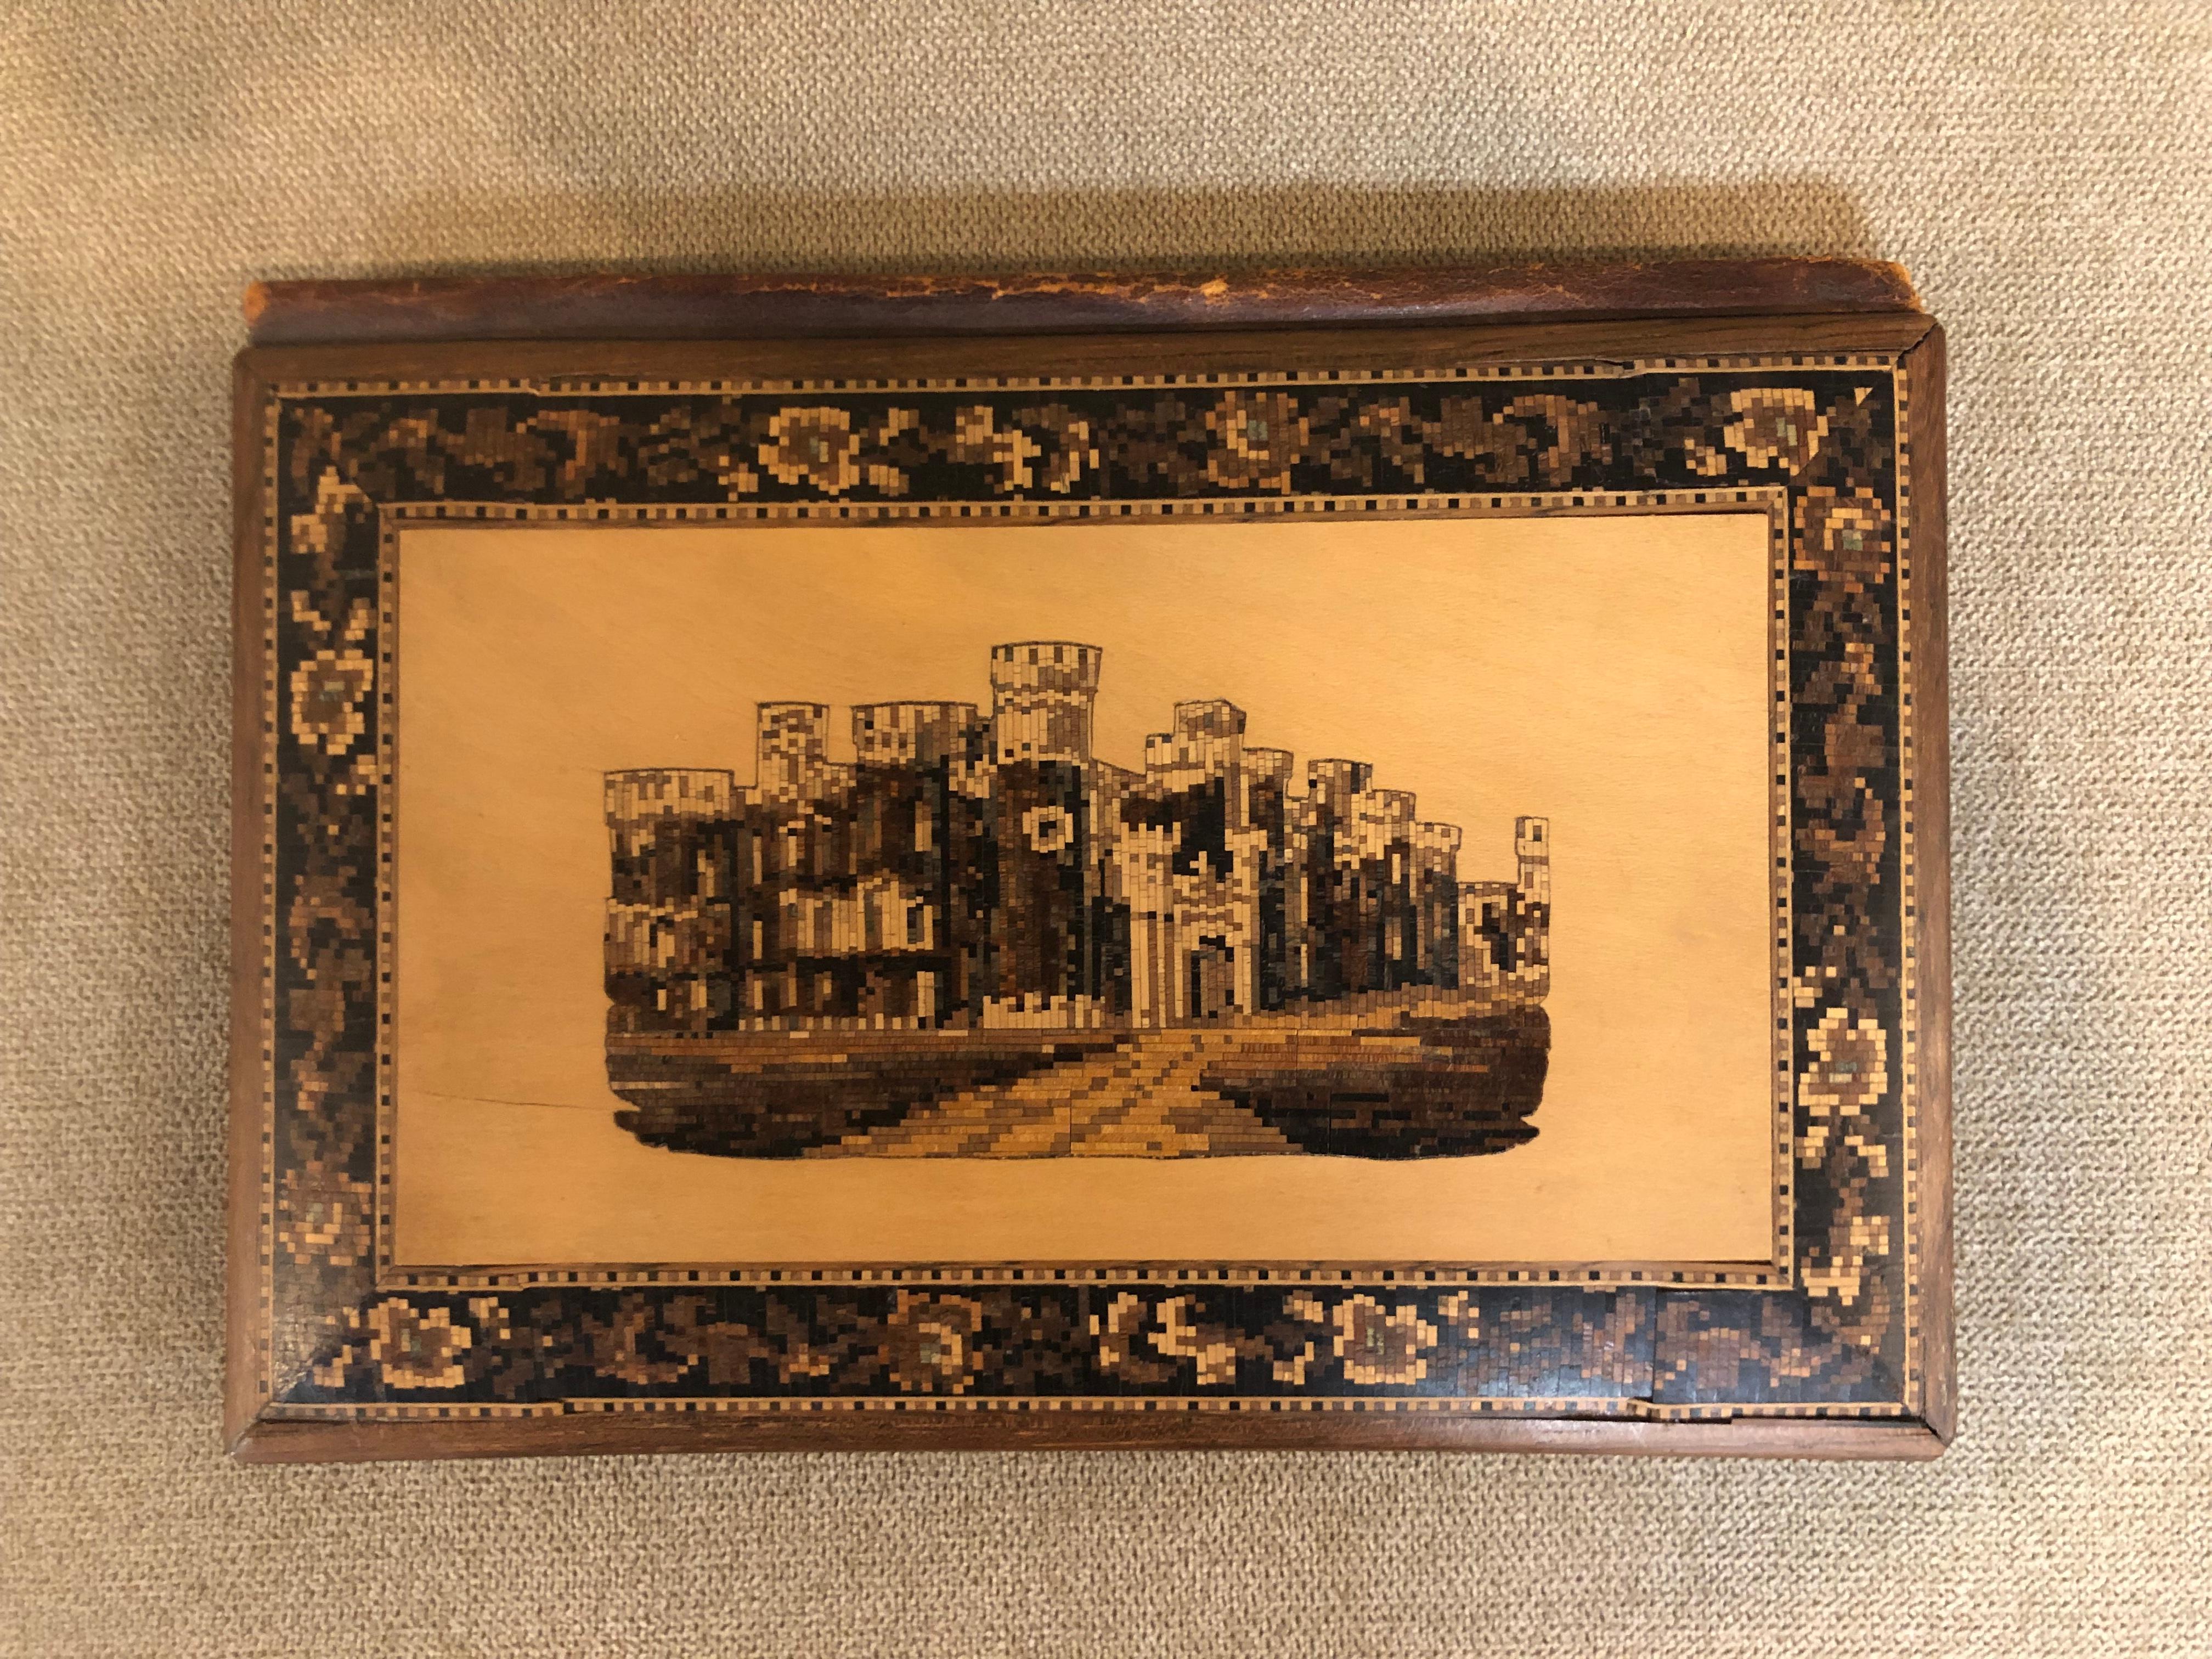 Mid 19th century tunbridge ware book holder of historic Eridge Castle in East Sussex England. This is a beautiful and hard to find decorative book holder made of walnut with a satinwood background. Tunbridge ware is from the spa town of Royal